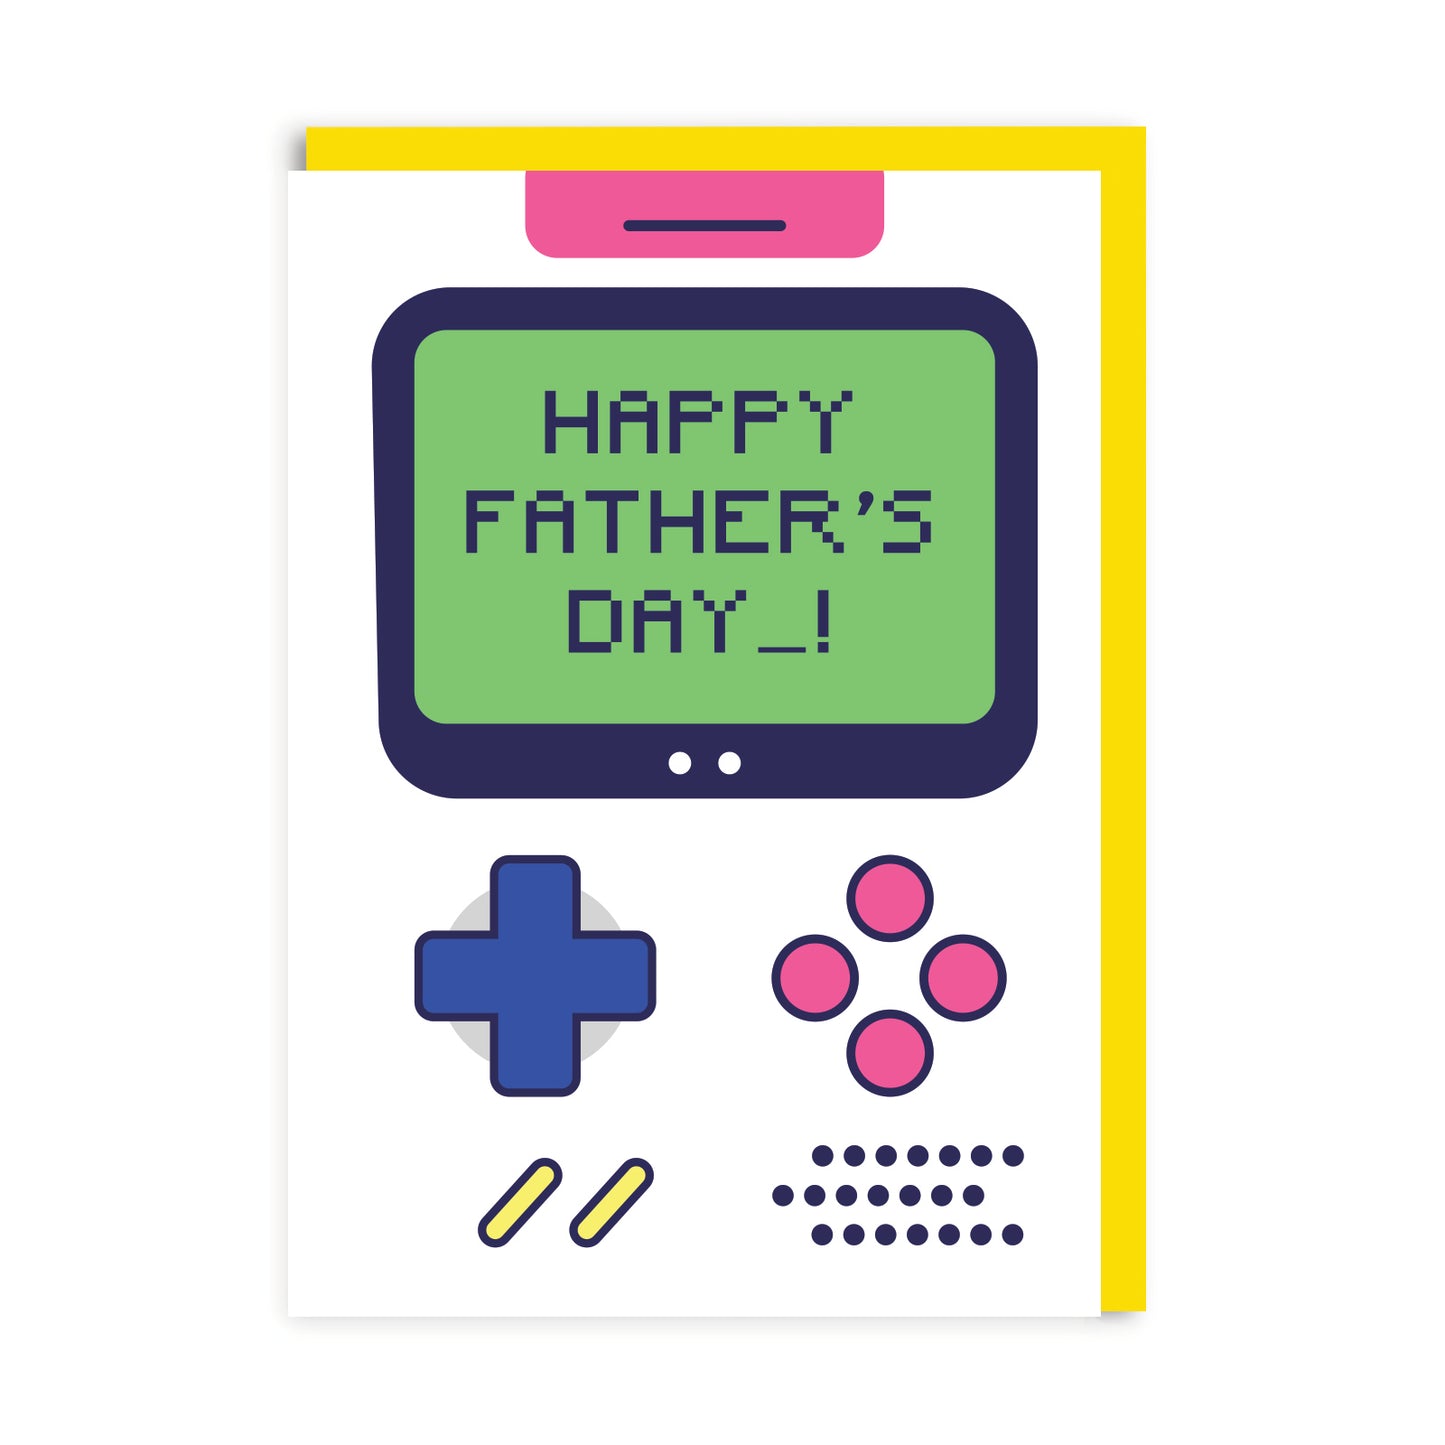 Father's Day Best Selling Card Bundle